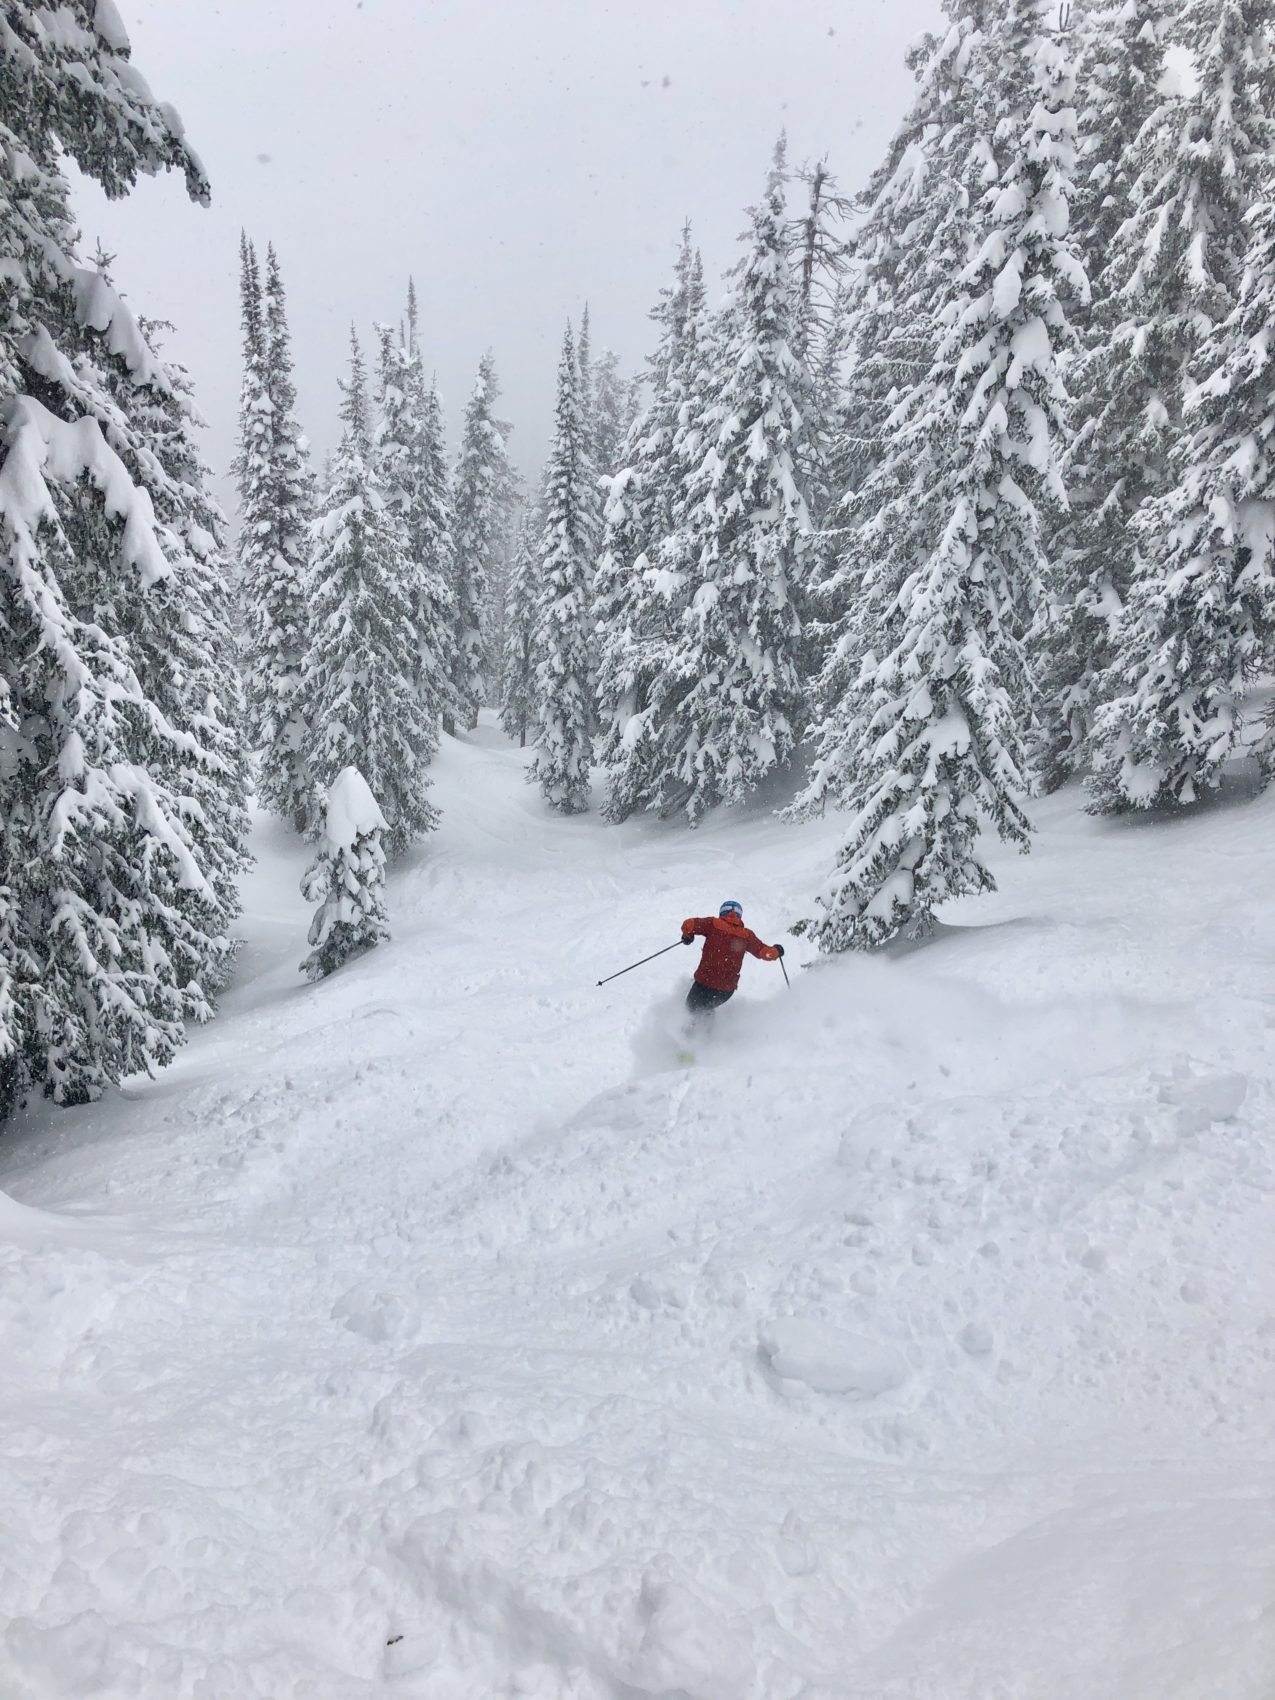 You Haven't Skied Until You've Skied Champagne Powder - Snowbrains